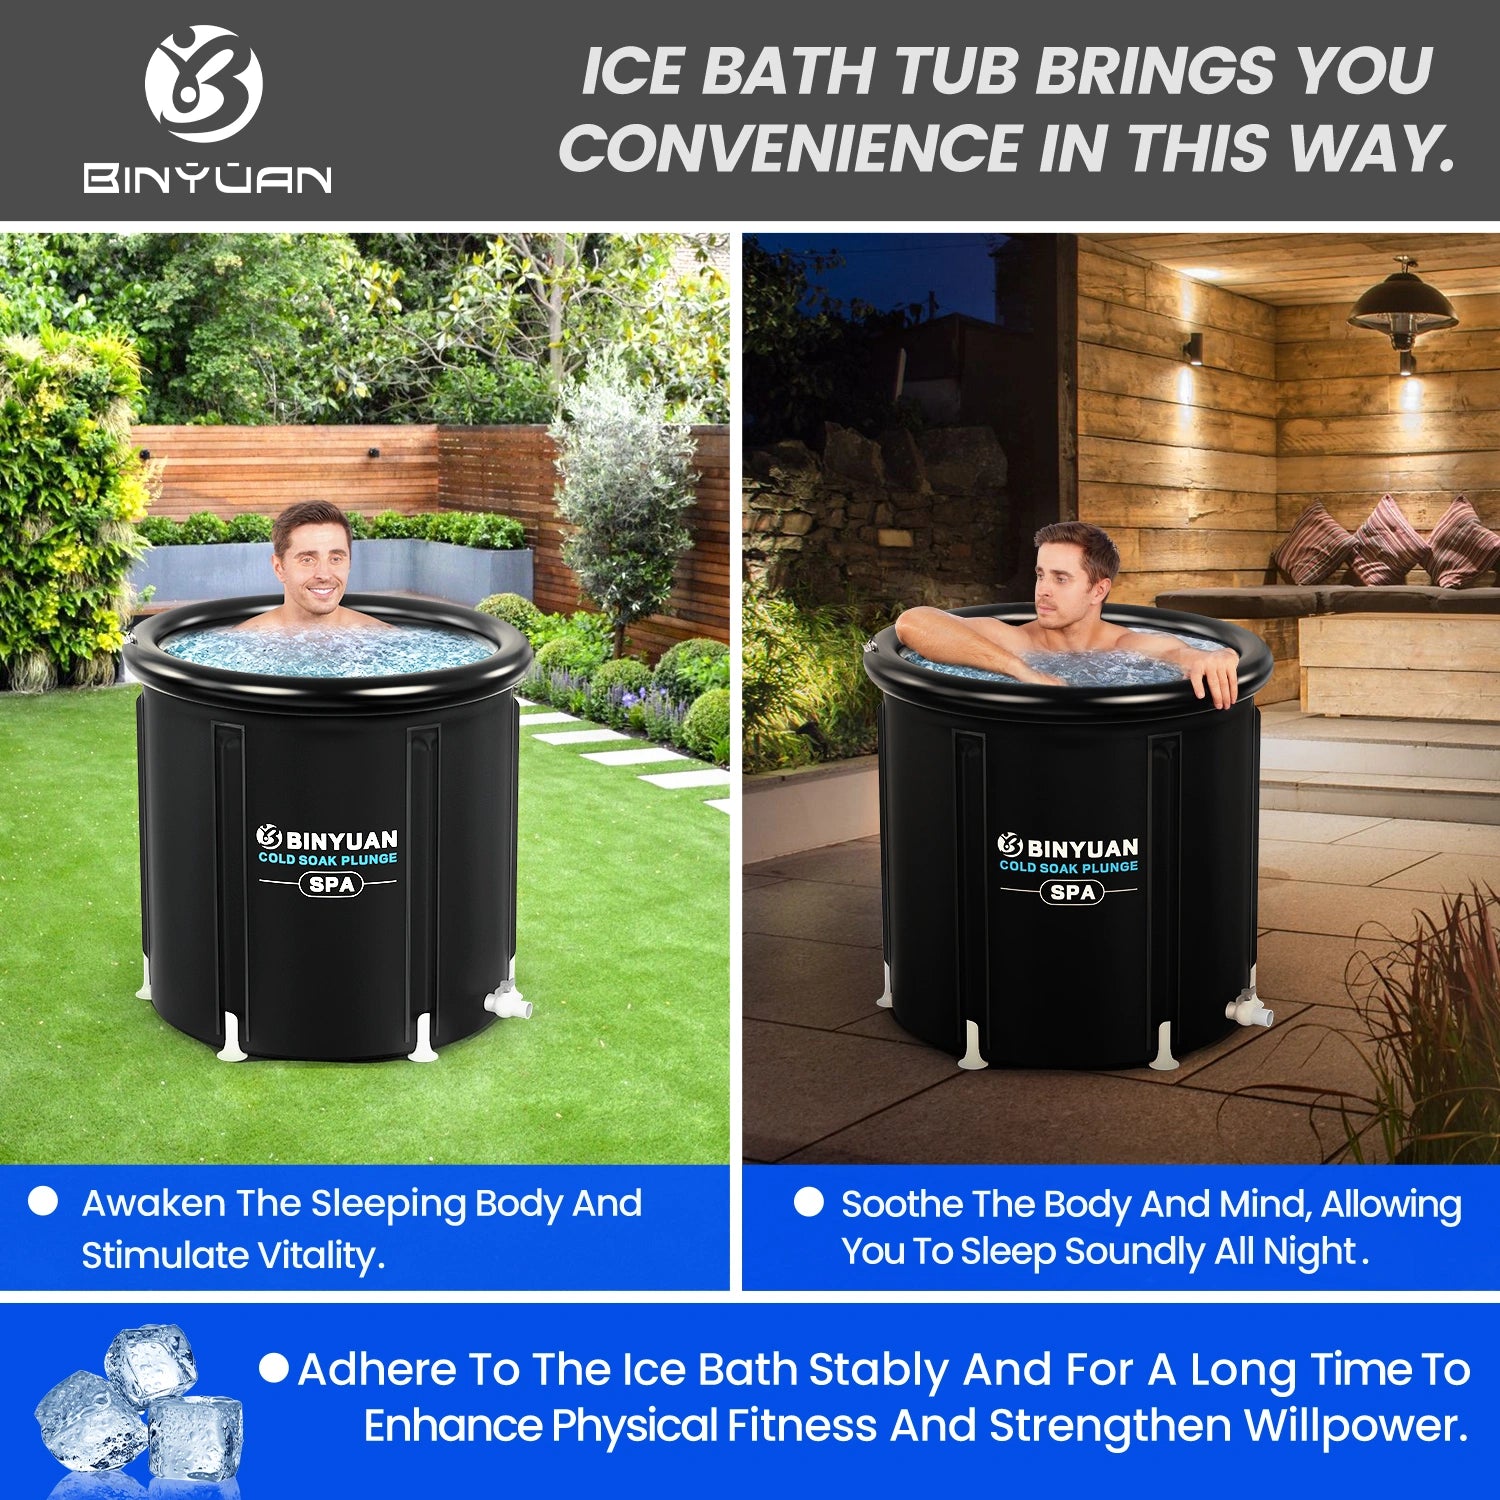 Versatile cold plunge tub for daytime revitalization and nighttime relaxation. Stimulates vitality and promotes better sleep, suitable for outdoor and indoor use.